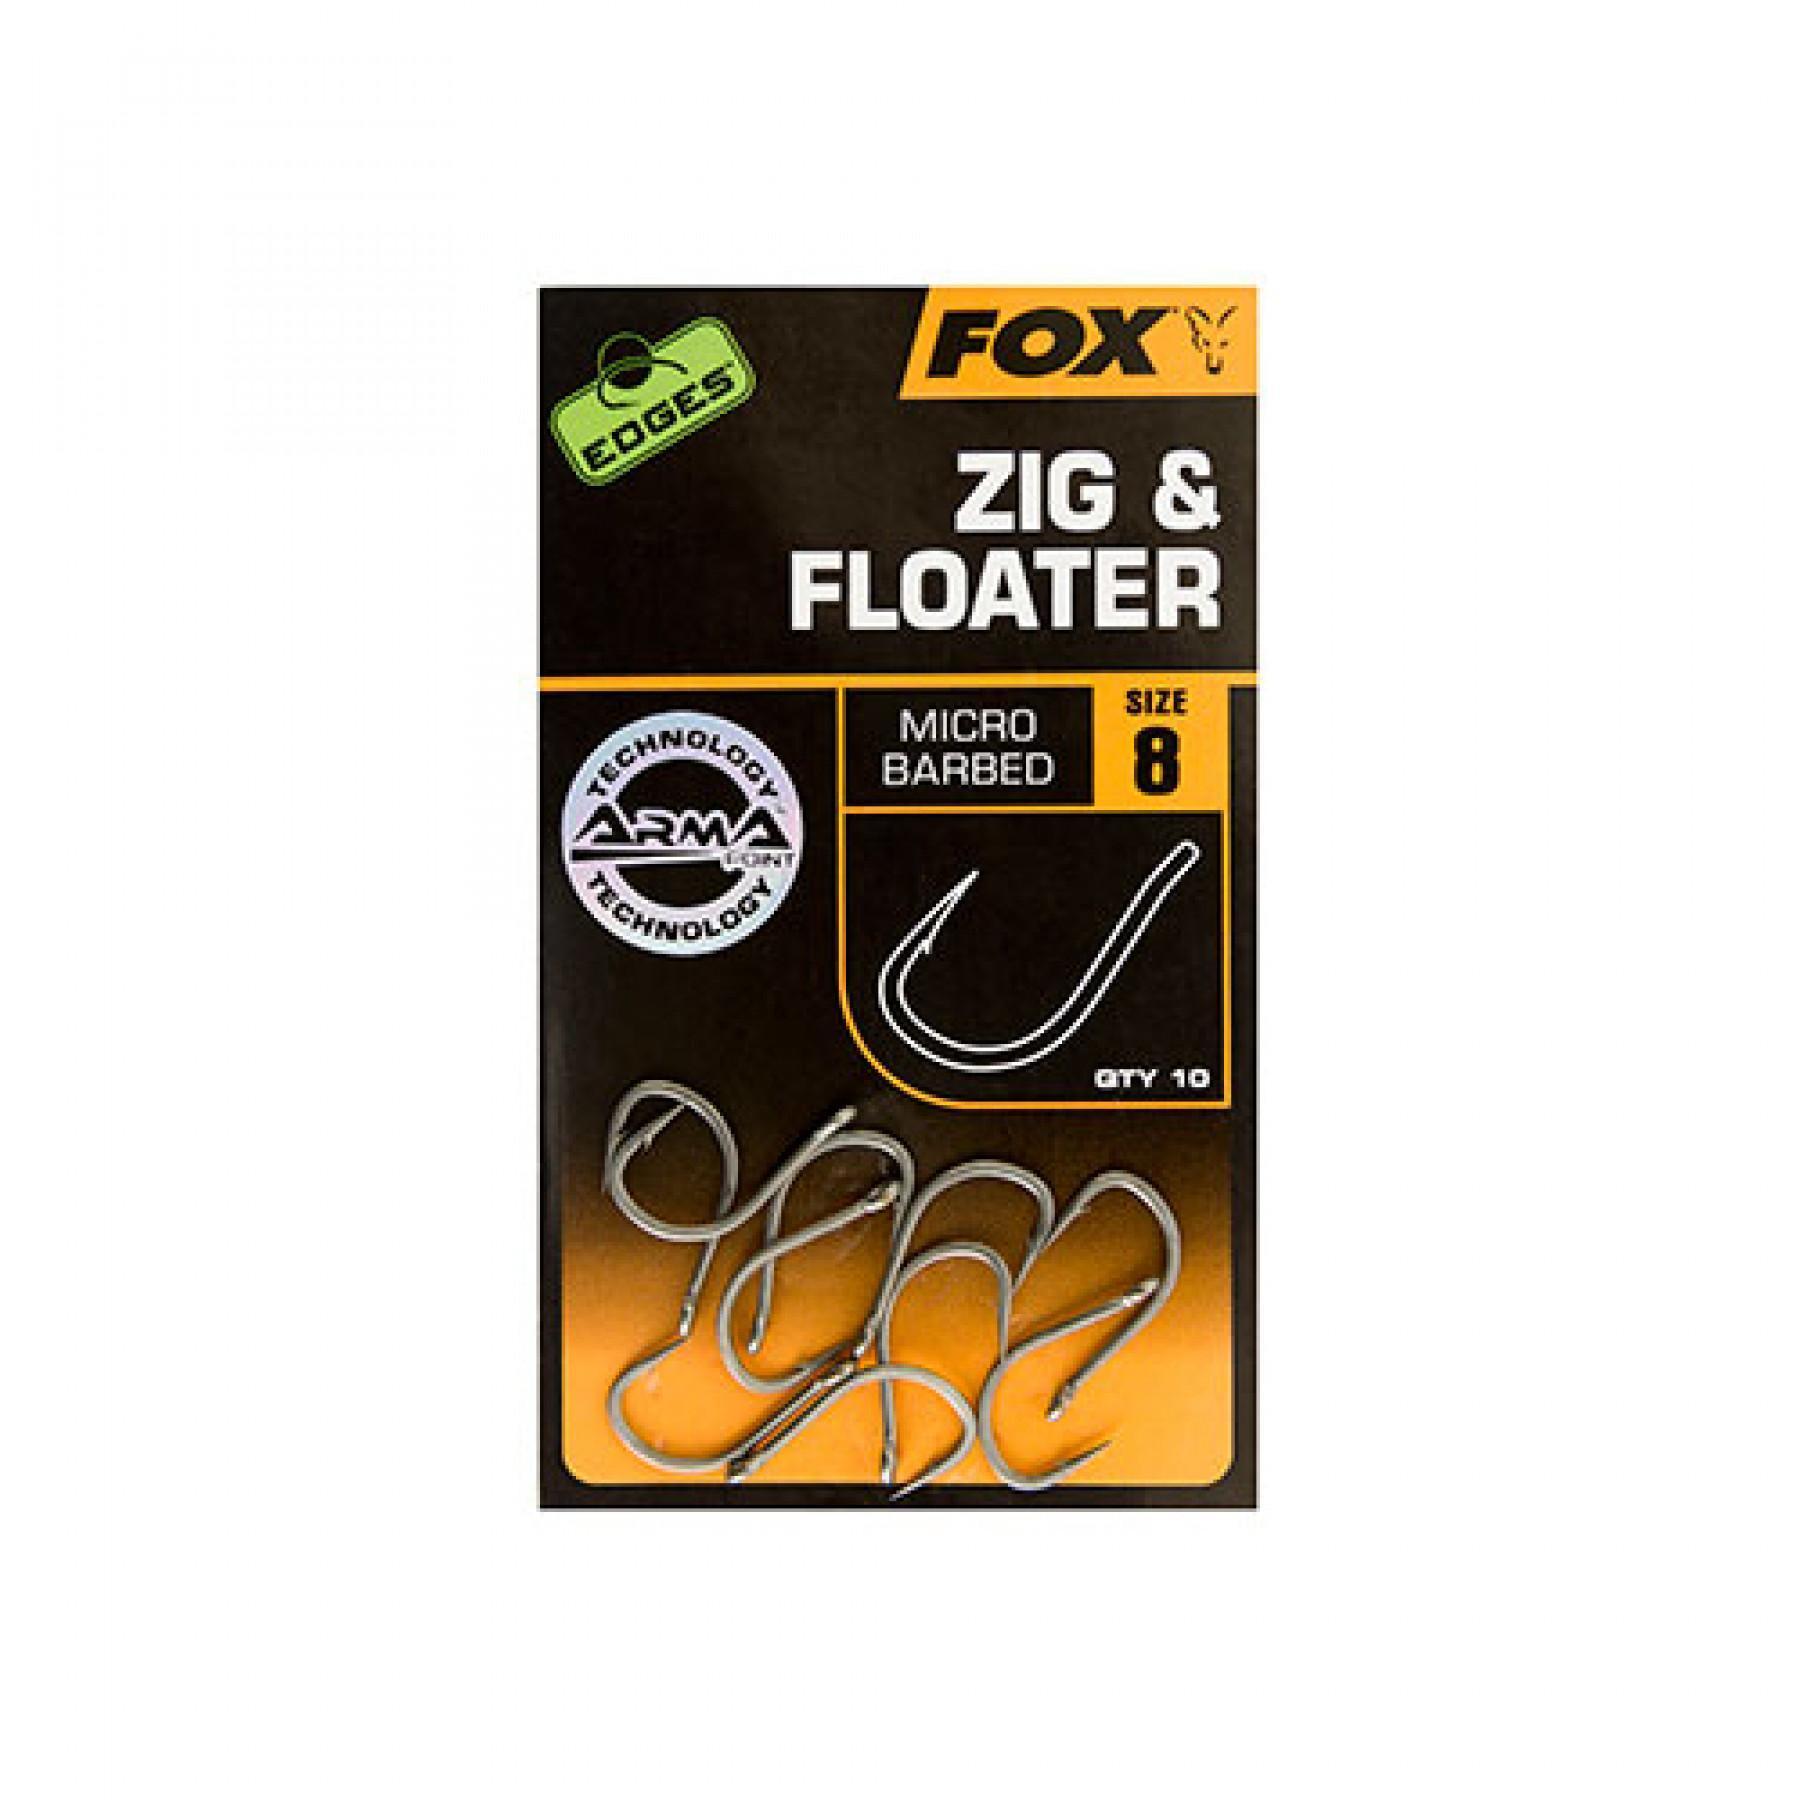 Gancho Fox Zig & Floater Edges taille 8